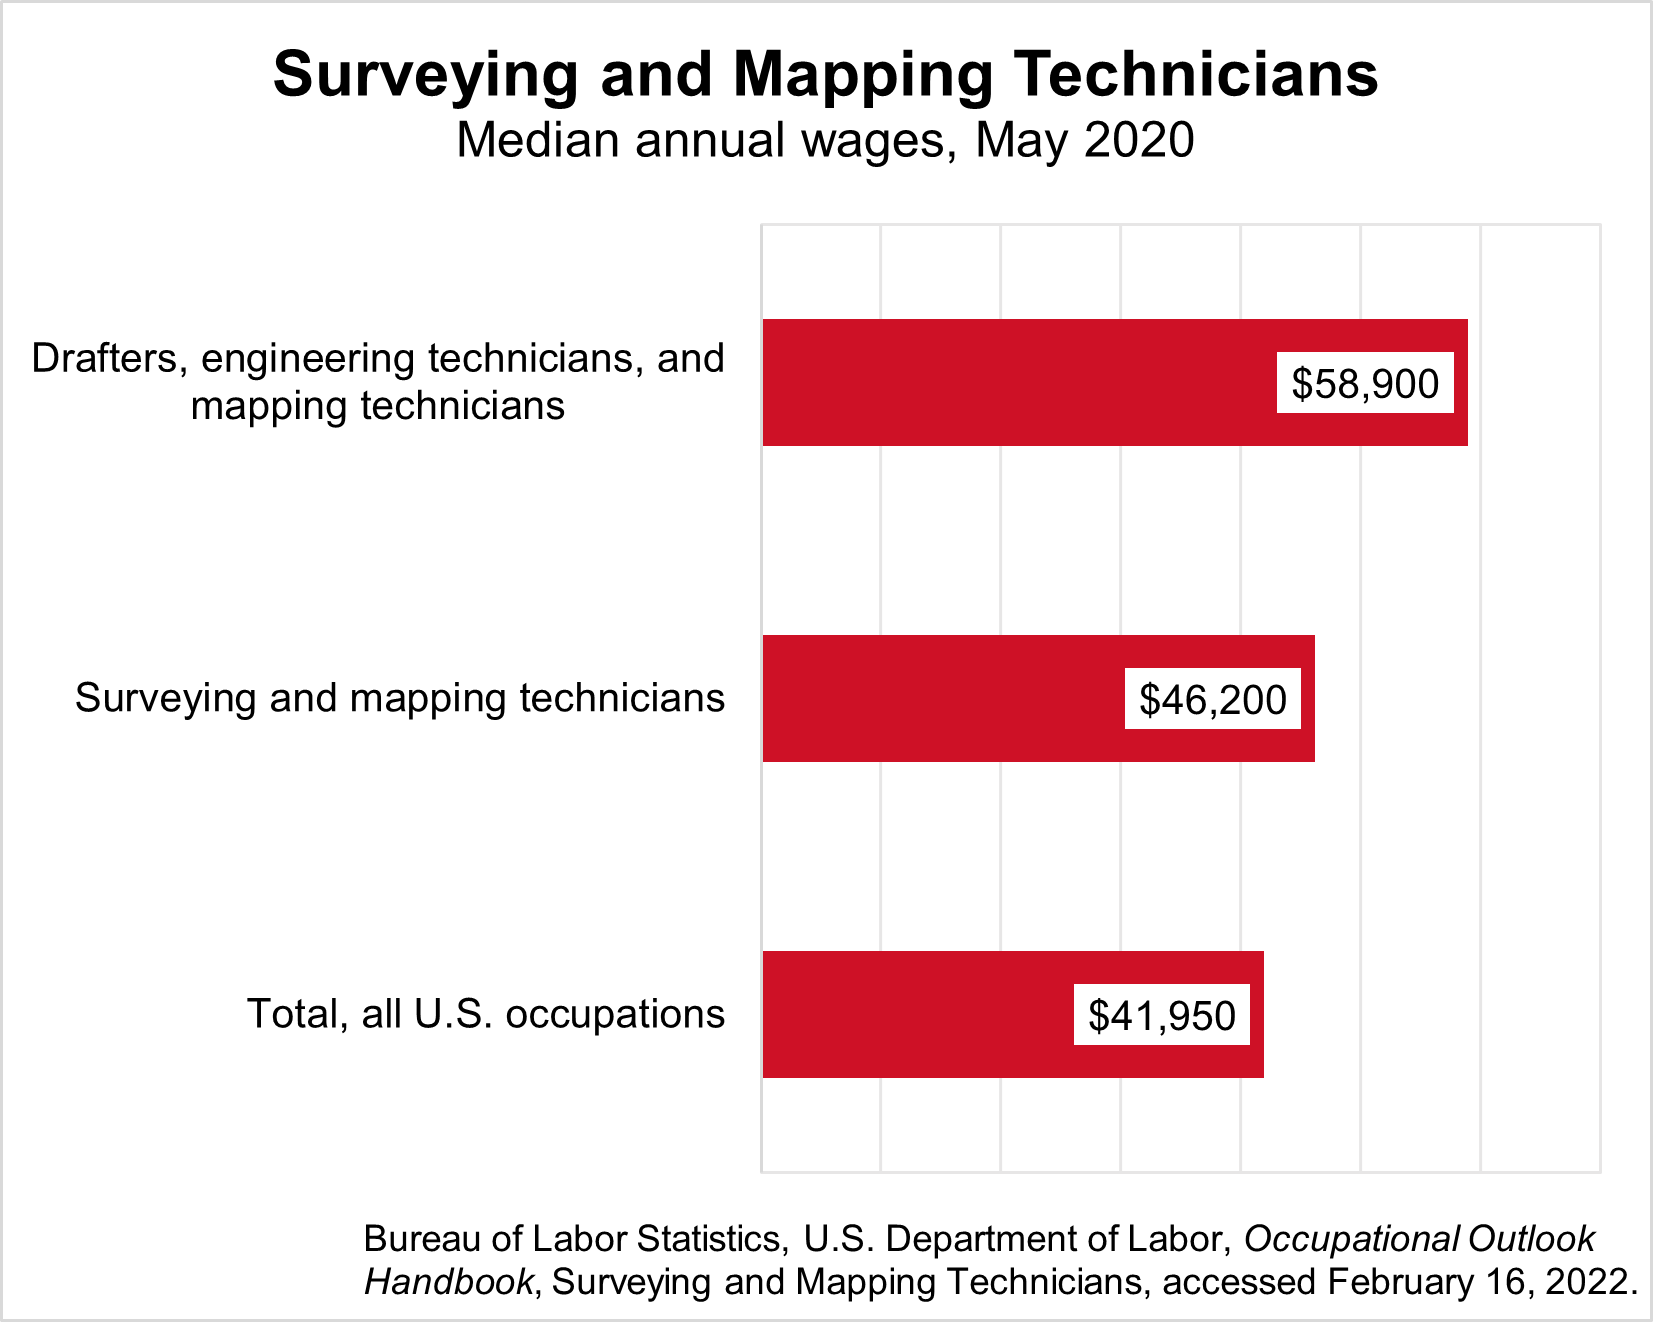 The median annual wages for surveying and mapping technicians and related occupations in May 2020 was: drafters, engineering technicians, and mapping technicians ($58,900), surveying and mapping technicians ($46,200).  The total for all U.S. occupations was $41,950.  Source: Bureau of Labor Statistics, U.S. Department of Labor, Occupational Outlook Handbook, Surveying and Mapping Technicians, accessed February 16, 2022.